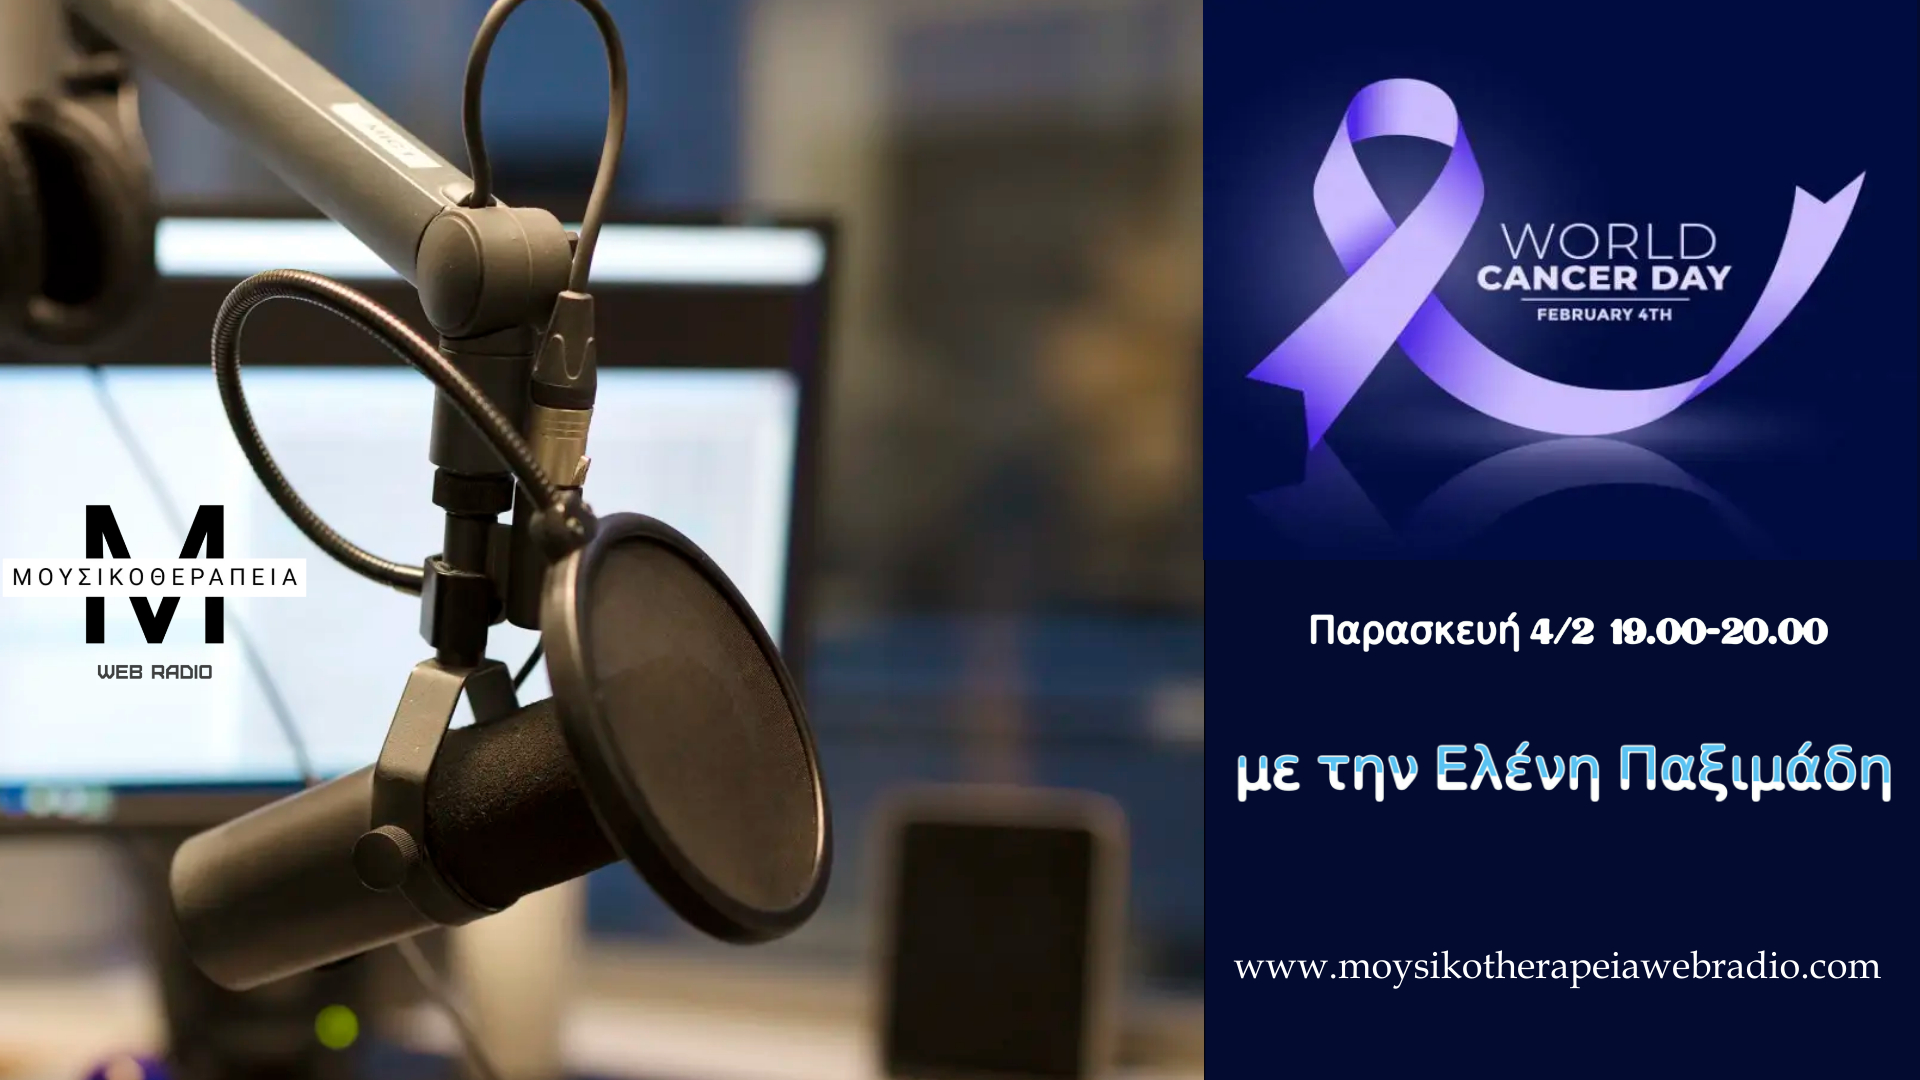 Read more about the article Ραδιοφωνική εκπομπή αφιερωμένη στη Παγκόσμια Ημέρα κατά του Καρκίνου, με την Ελένη Παξιμάδη